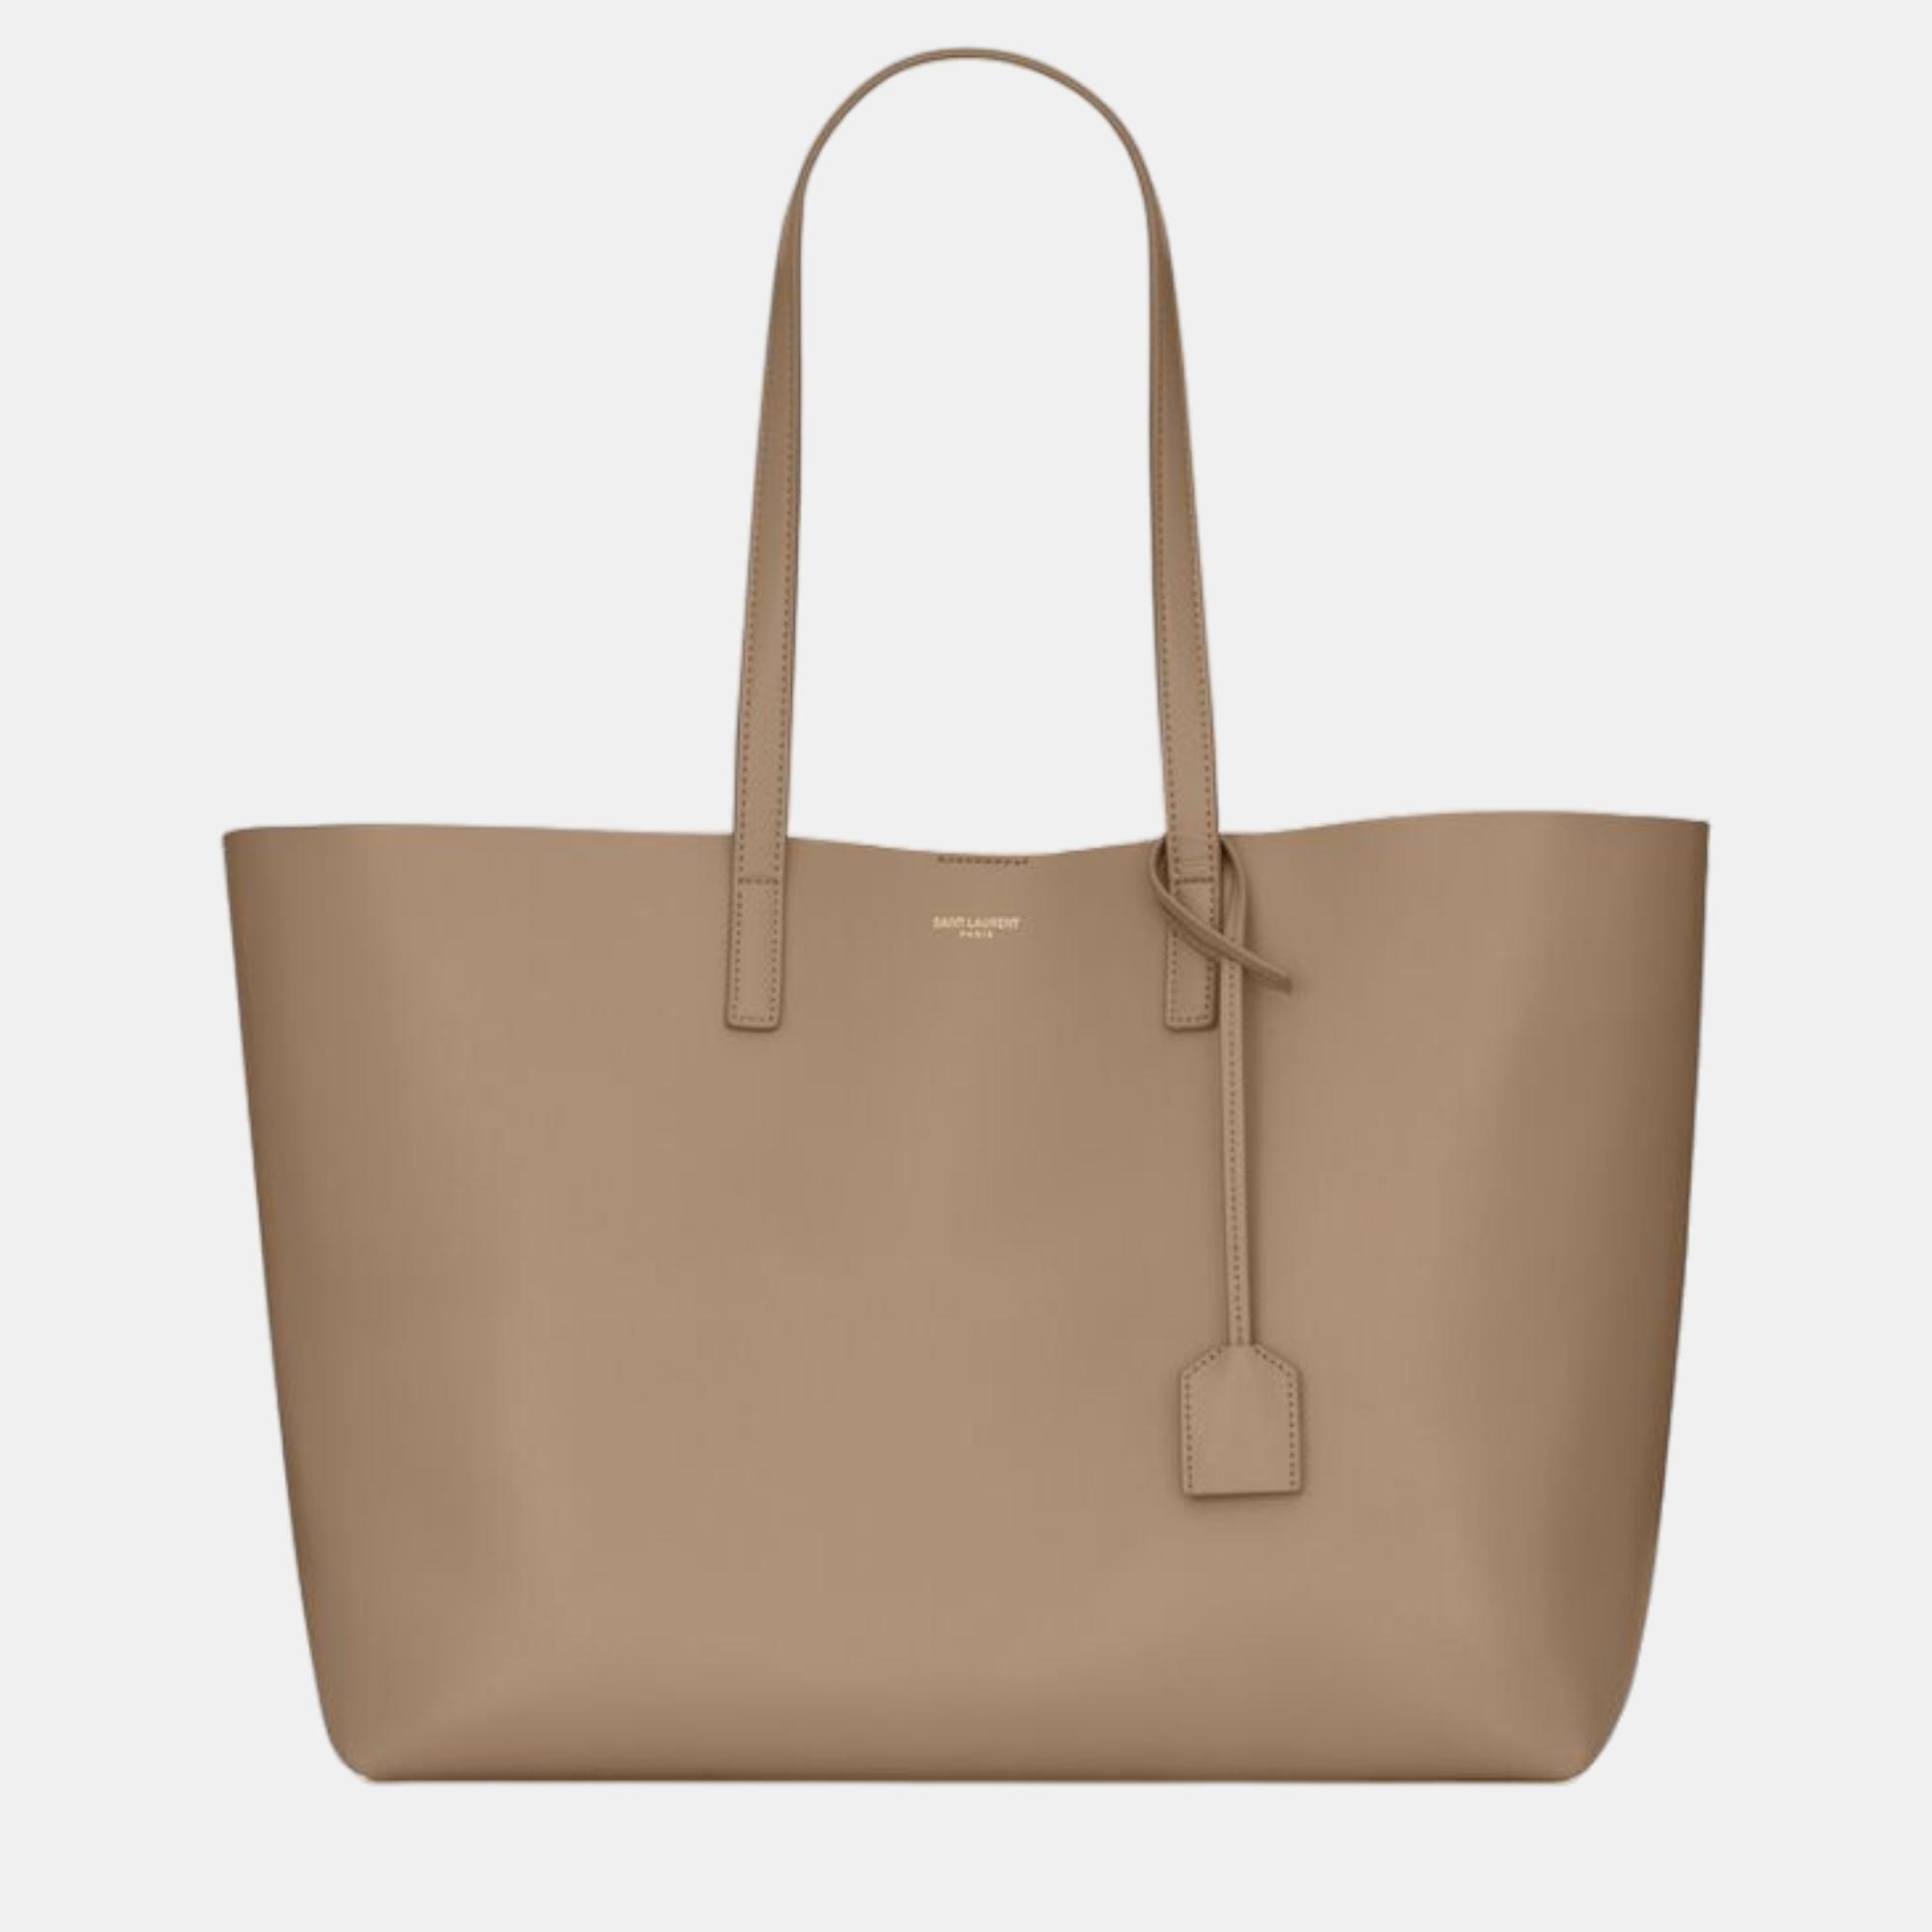 SHOPPING BAG SAINT LAURENT E/W IN SUPPLE LEATHER